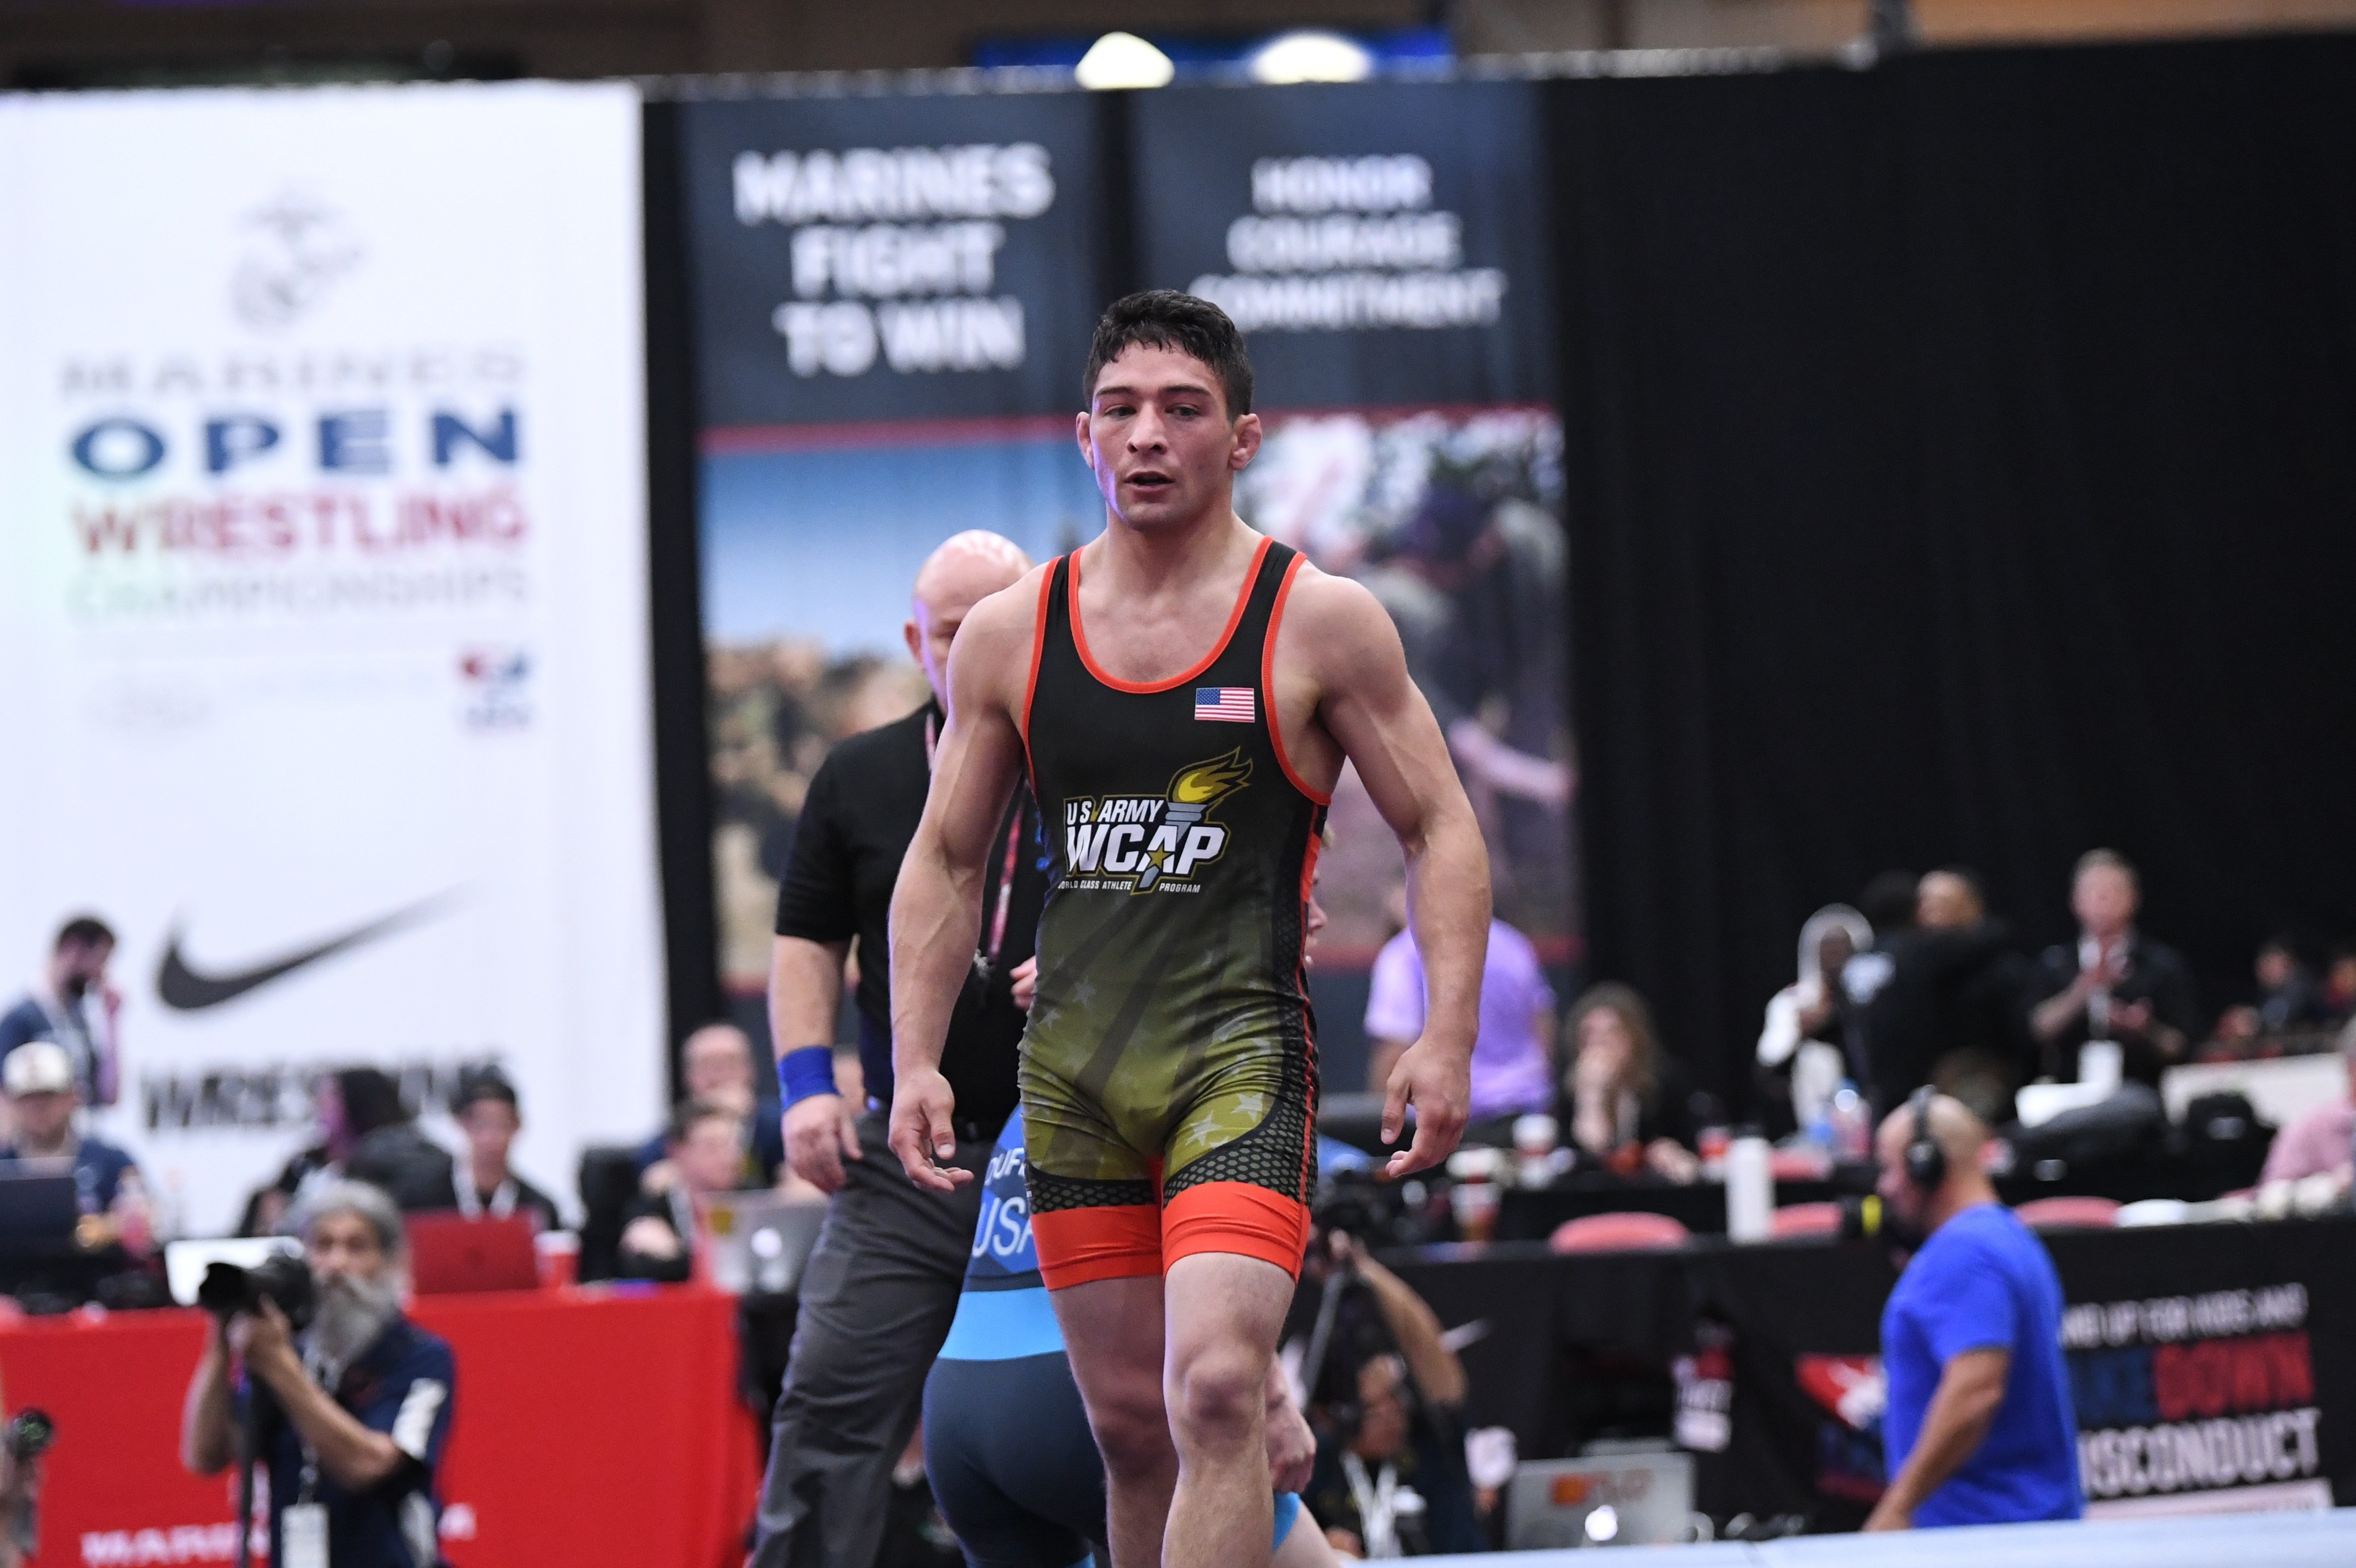 Three Soldiers headed to Wrestling World Championship Article The